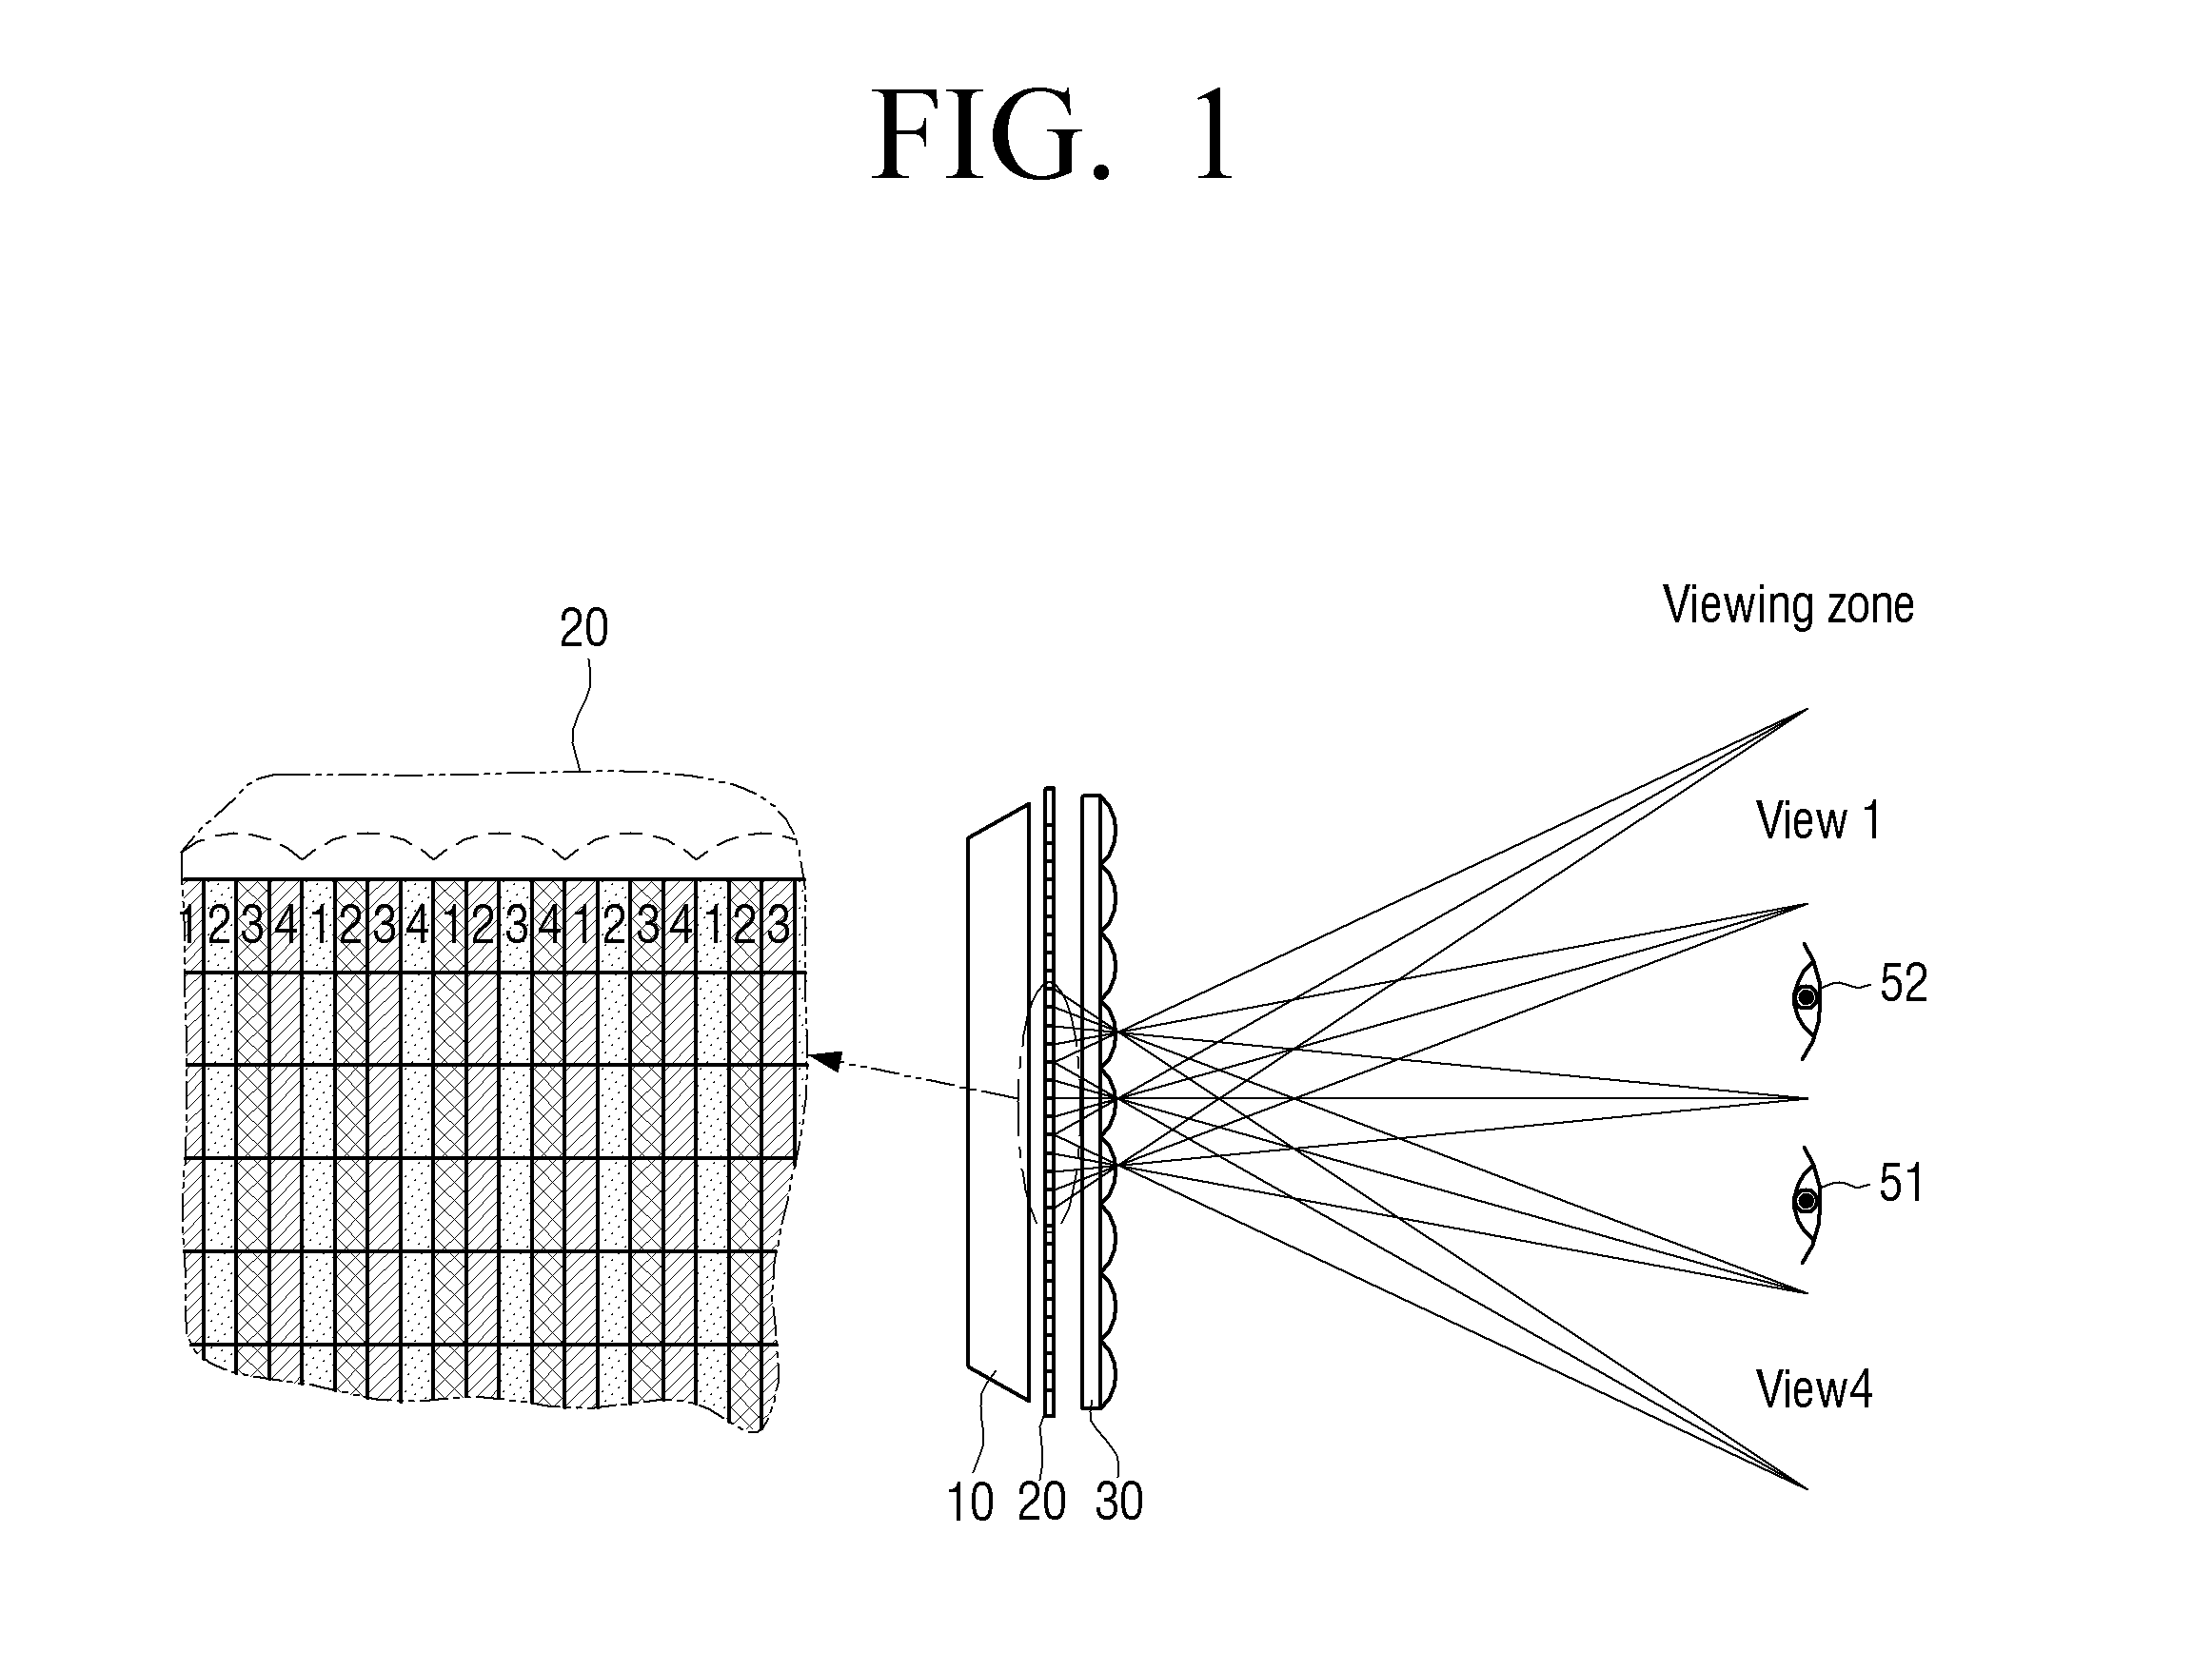 Multiview image generating method and multiview image display apparatus